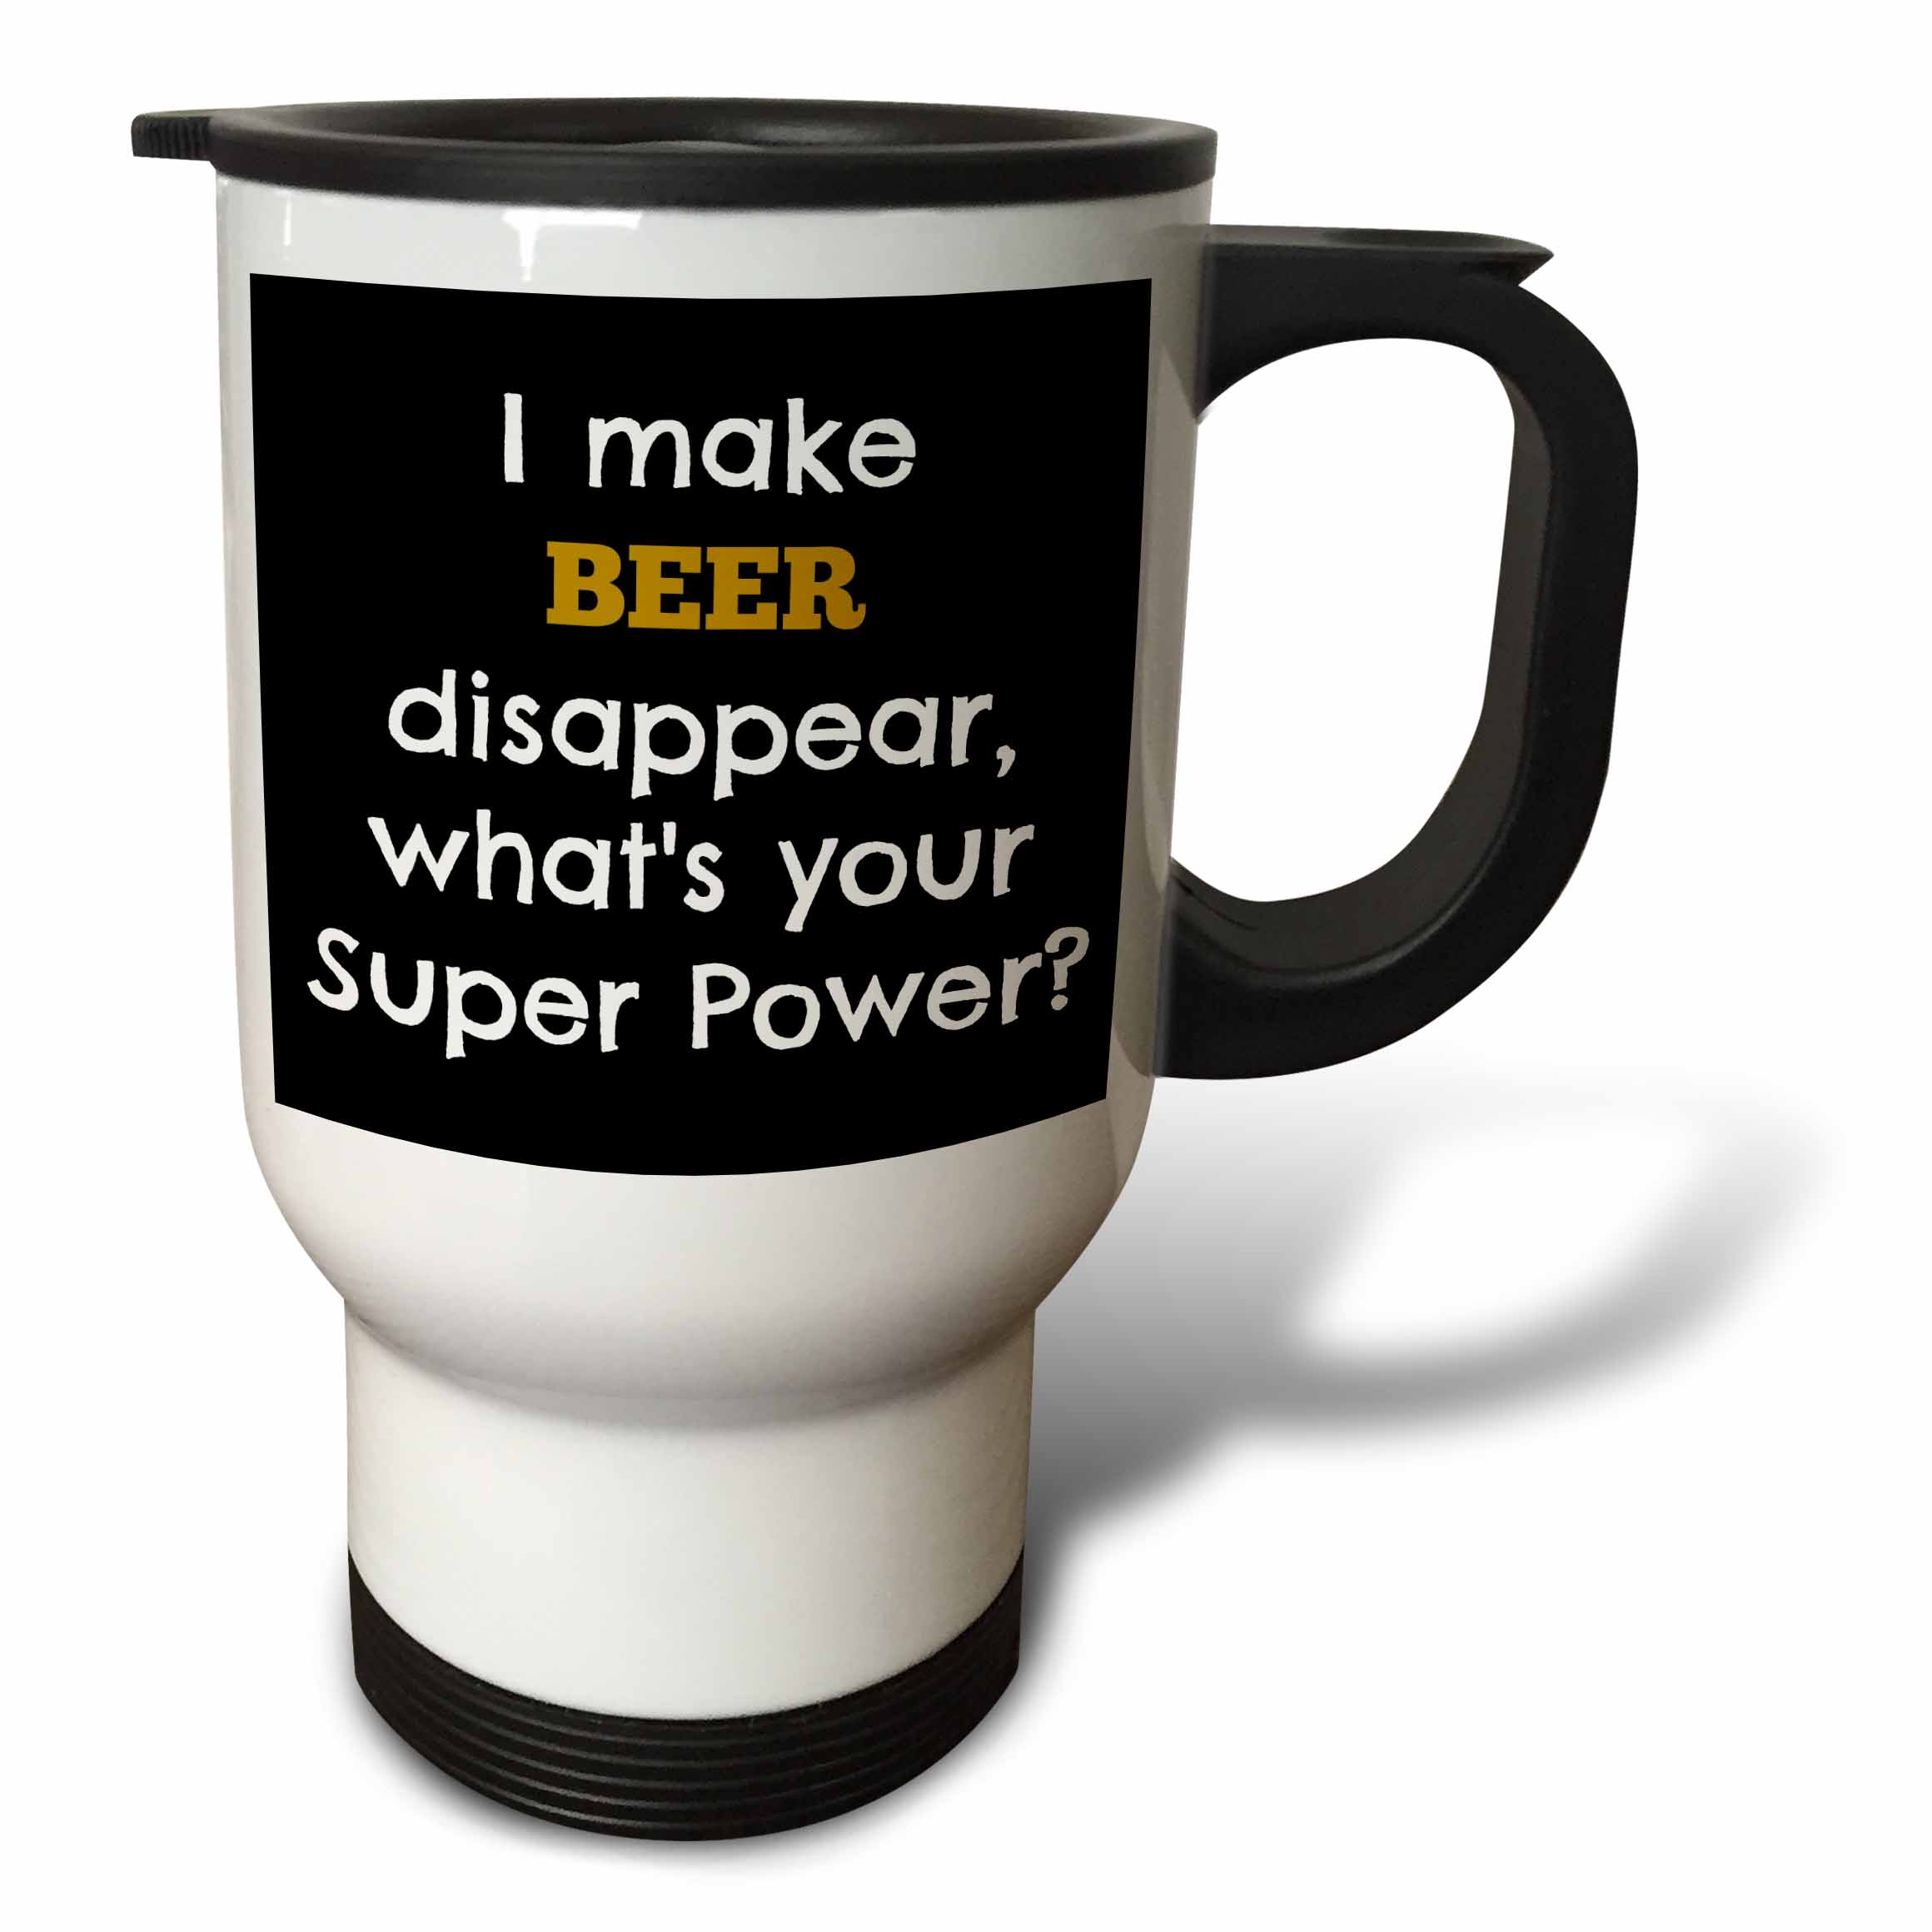 I make beer disappear whats your super power 14oz Stainless Steel Travel Mug tm-214432-1 - image 1 of 1